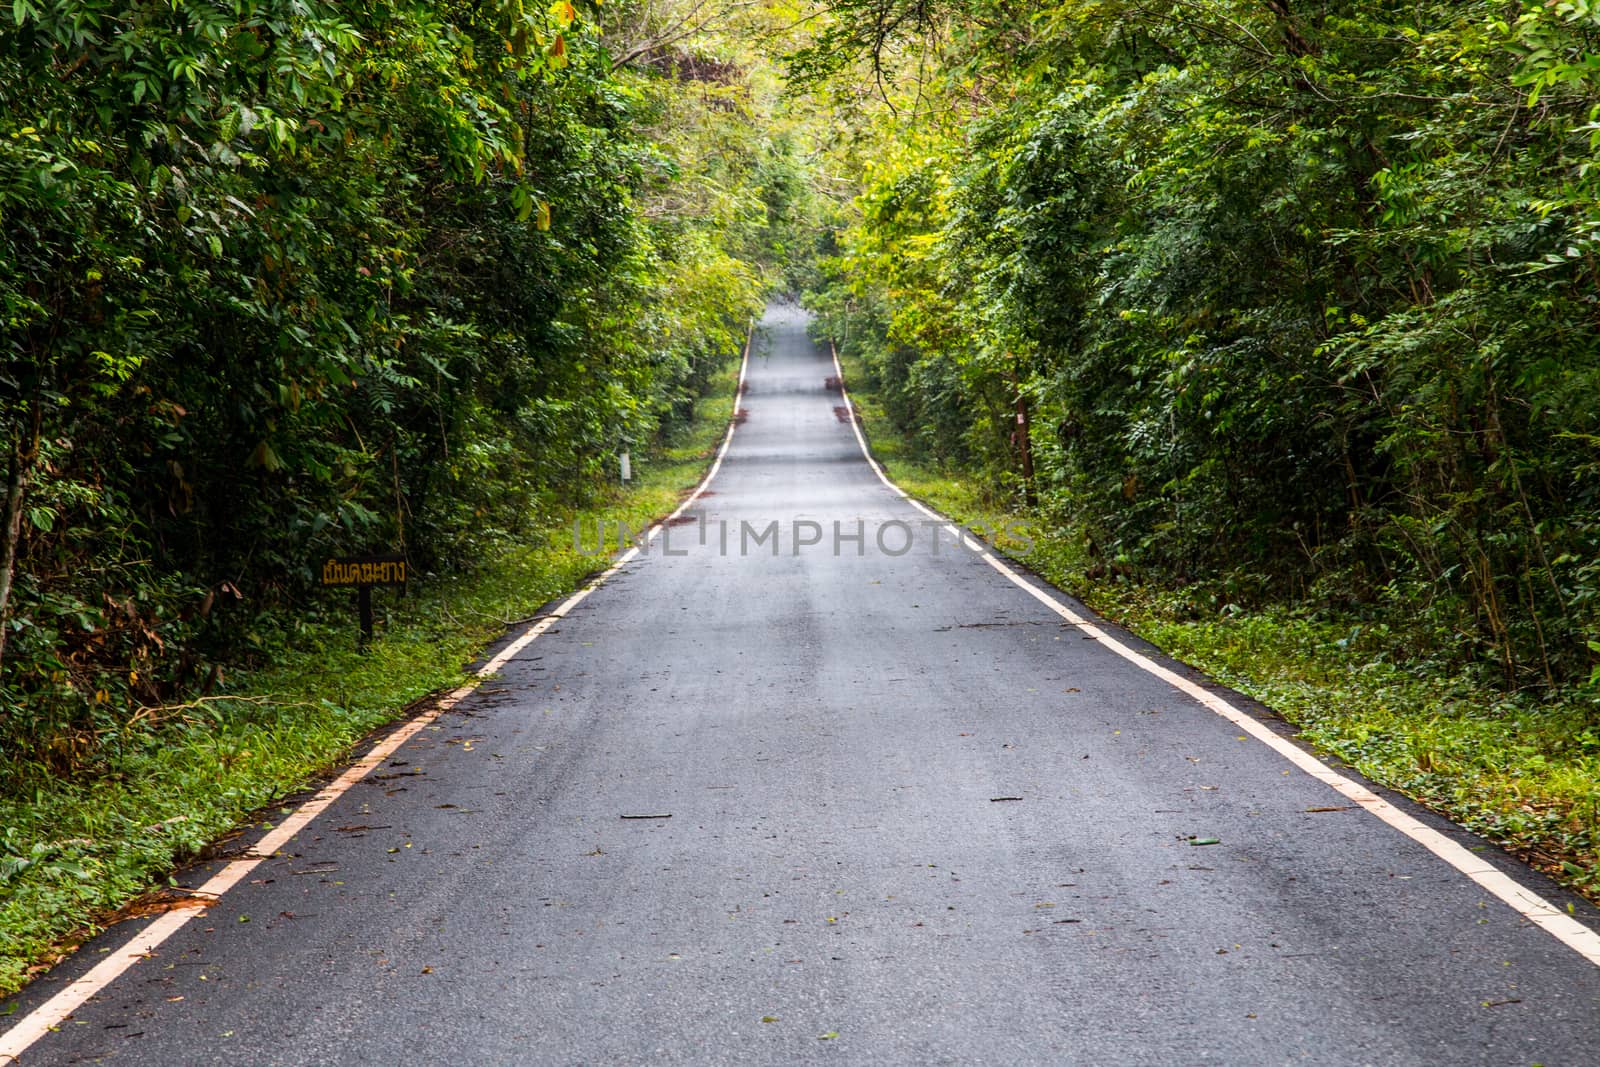 road in Thailand forest